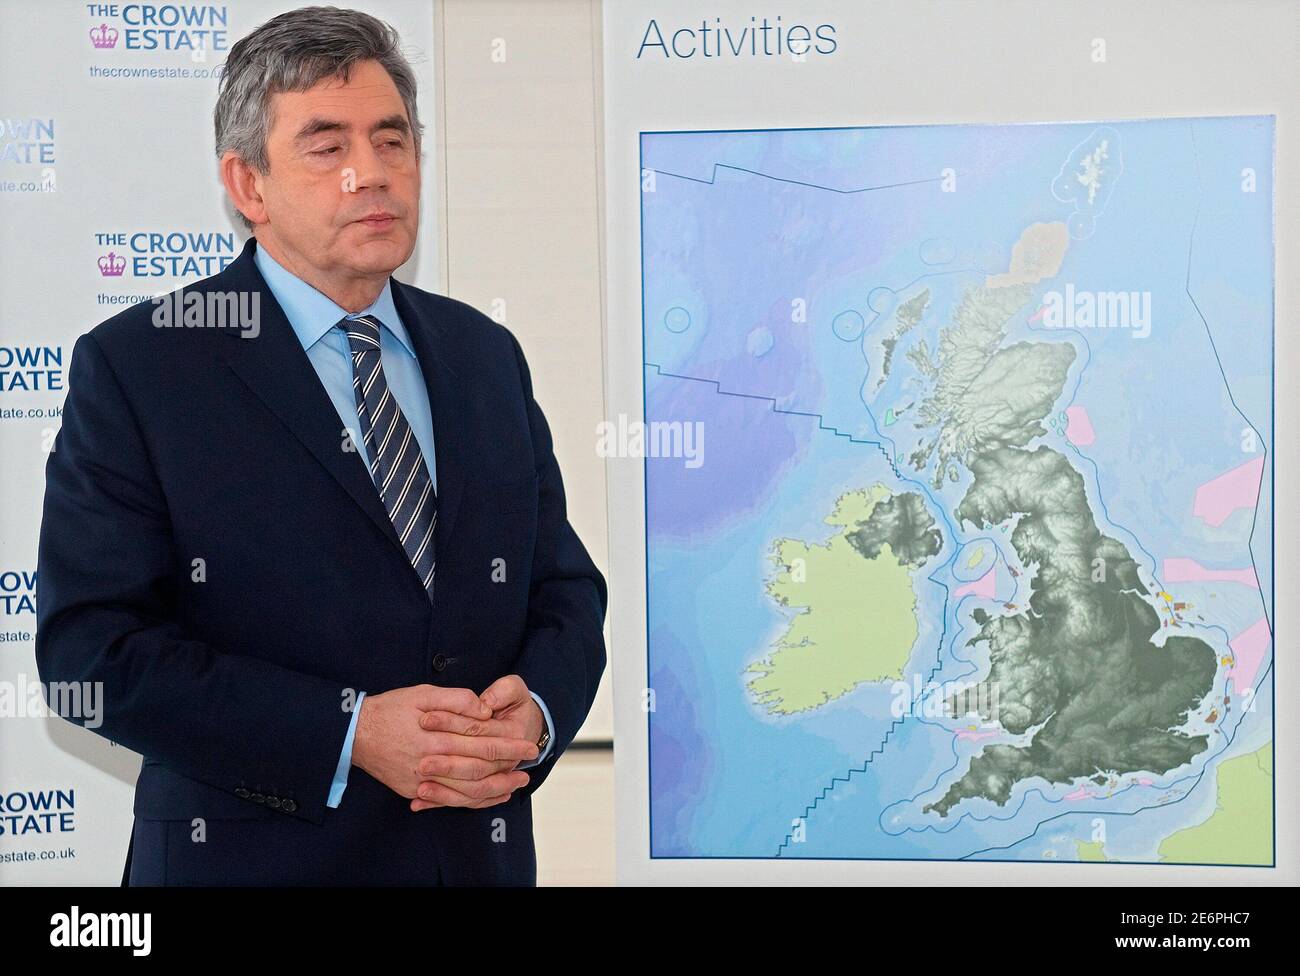 Britain's Prime Minister Gordon Brown stands with a map showing details of a new initiative to build off-shore wind farms, ahead of a news conference in central London January 8, 2010.  Britain has awarded energy companies rights to develop some of the world's biggest offshore wind farms, triggering a race to win financing for the complex, risky and high-maintenance projects. The Crown Estate, in charge of Britain's coastal seabed, on Friday announced winners for the Round 3 tender, including Portugal's EDP Renewables, Britain's Centrica, Germany's E.ON and Sweden's Vattenfall.     REUTERS/Leo Stock Photo